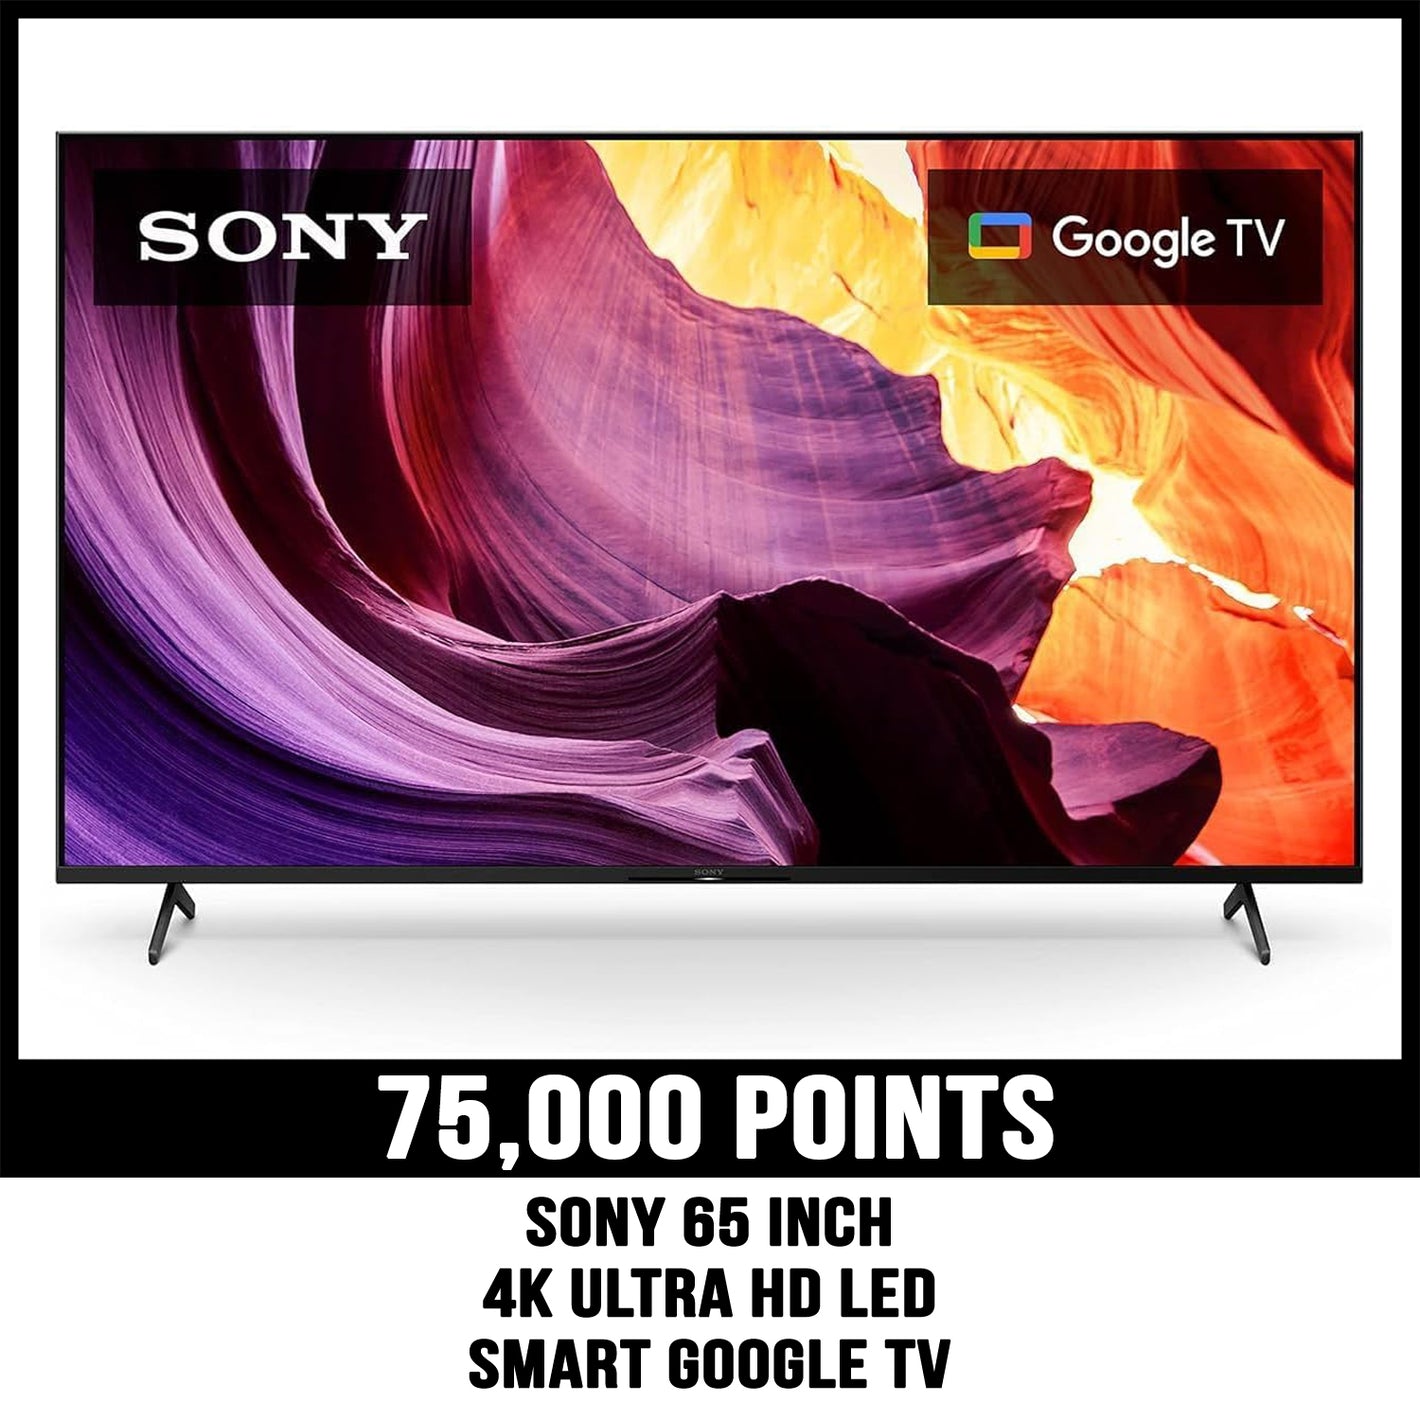 Sony 65 inch TV prize for 75000 points